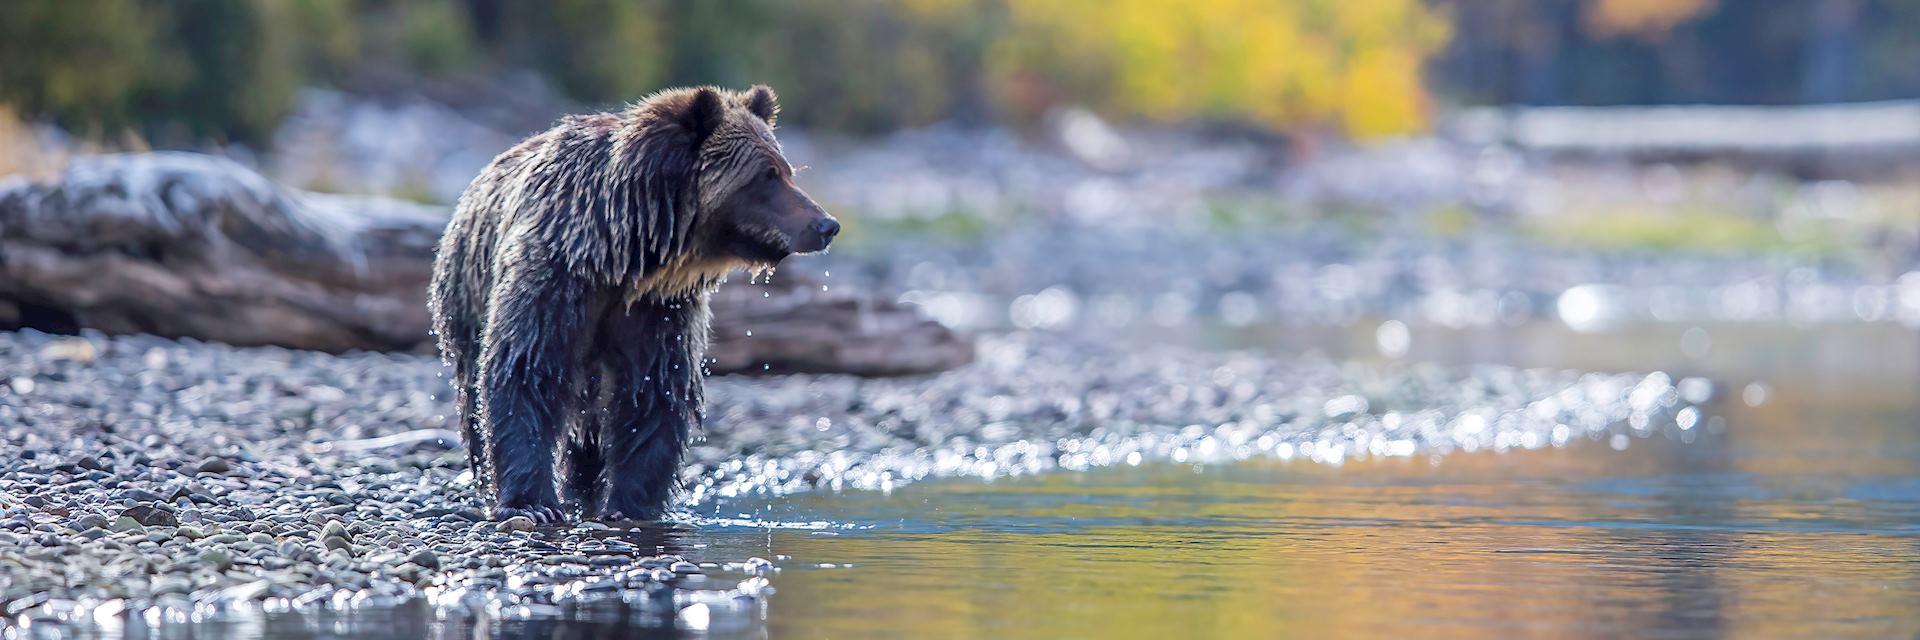 Grizzly bear, British Columbia